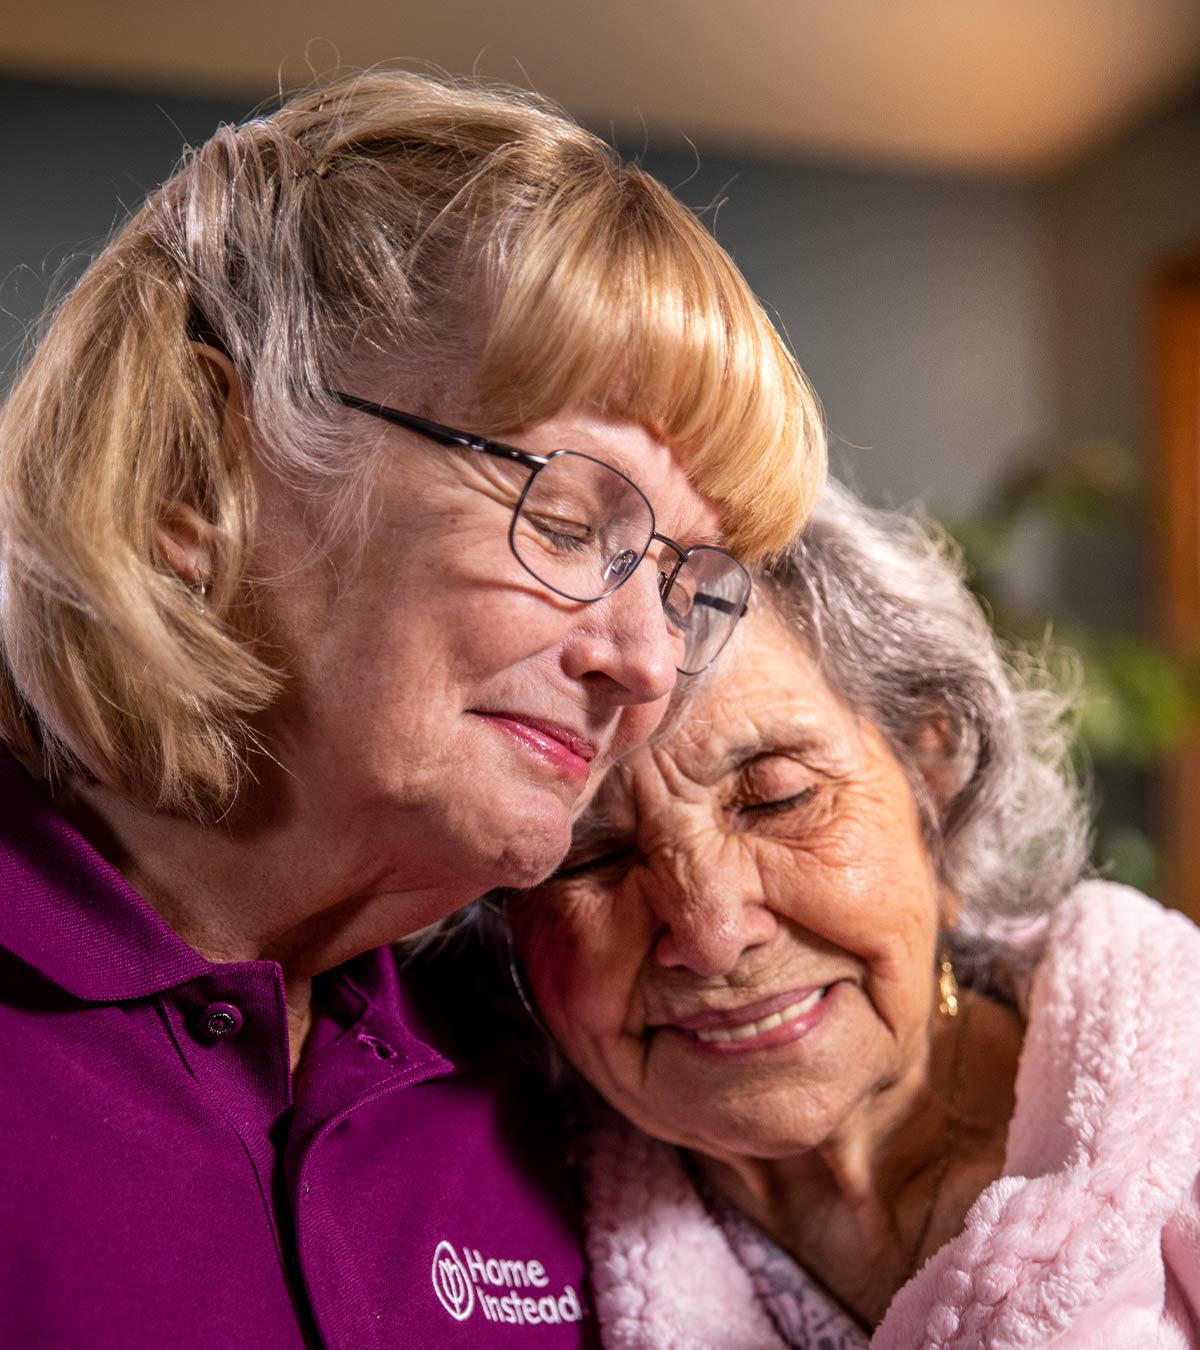 CAREGiver providing in-home senior care services. Home Instead of Chambersburg, PA provides Elder Care to aging adults. 